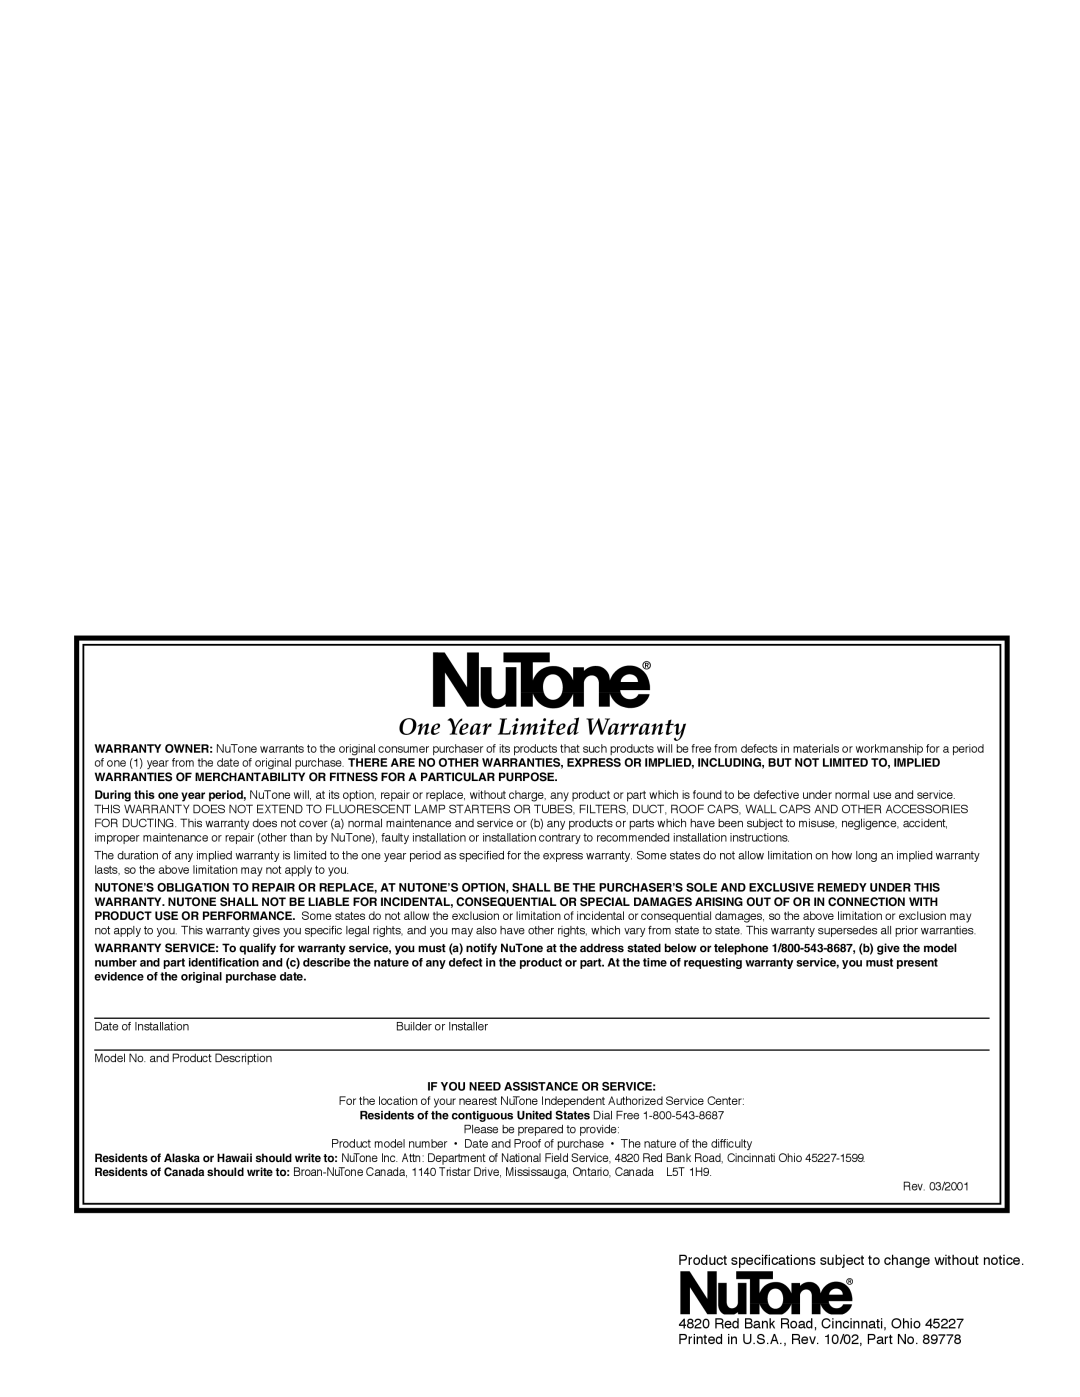 NuTone VS-63WH, VS-62WH One Year Limited Warranty, Product specifications subject to change without notice 